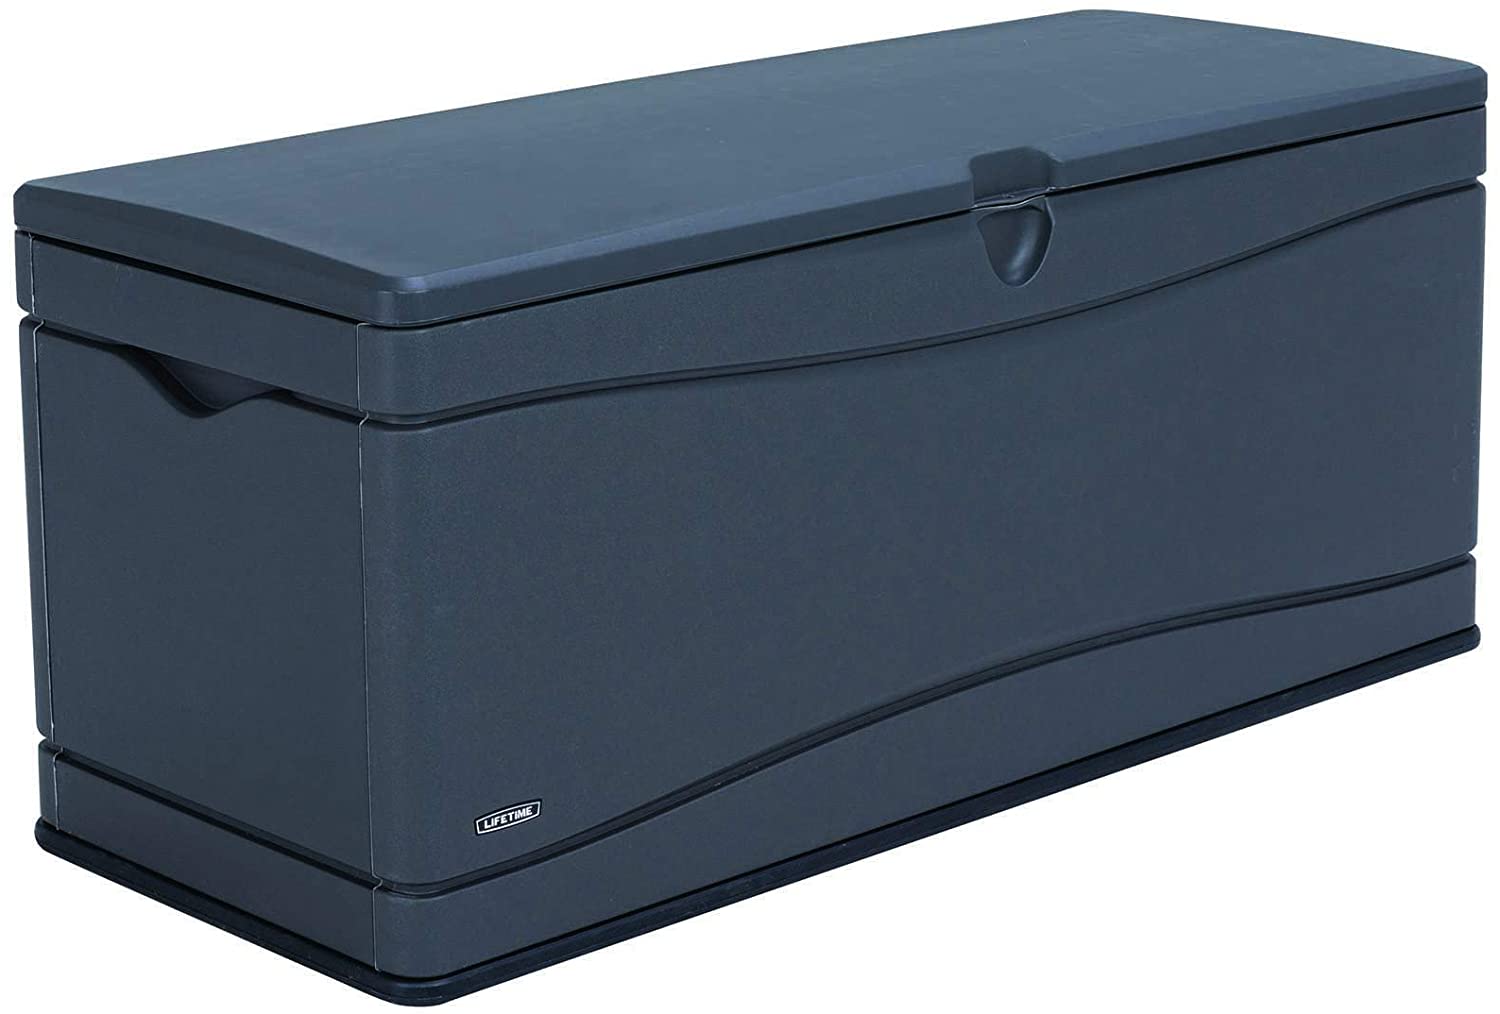 2. Lifetime 60298 Heavy Duty Storage Deck Box for Outdoors